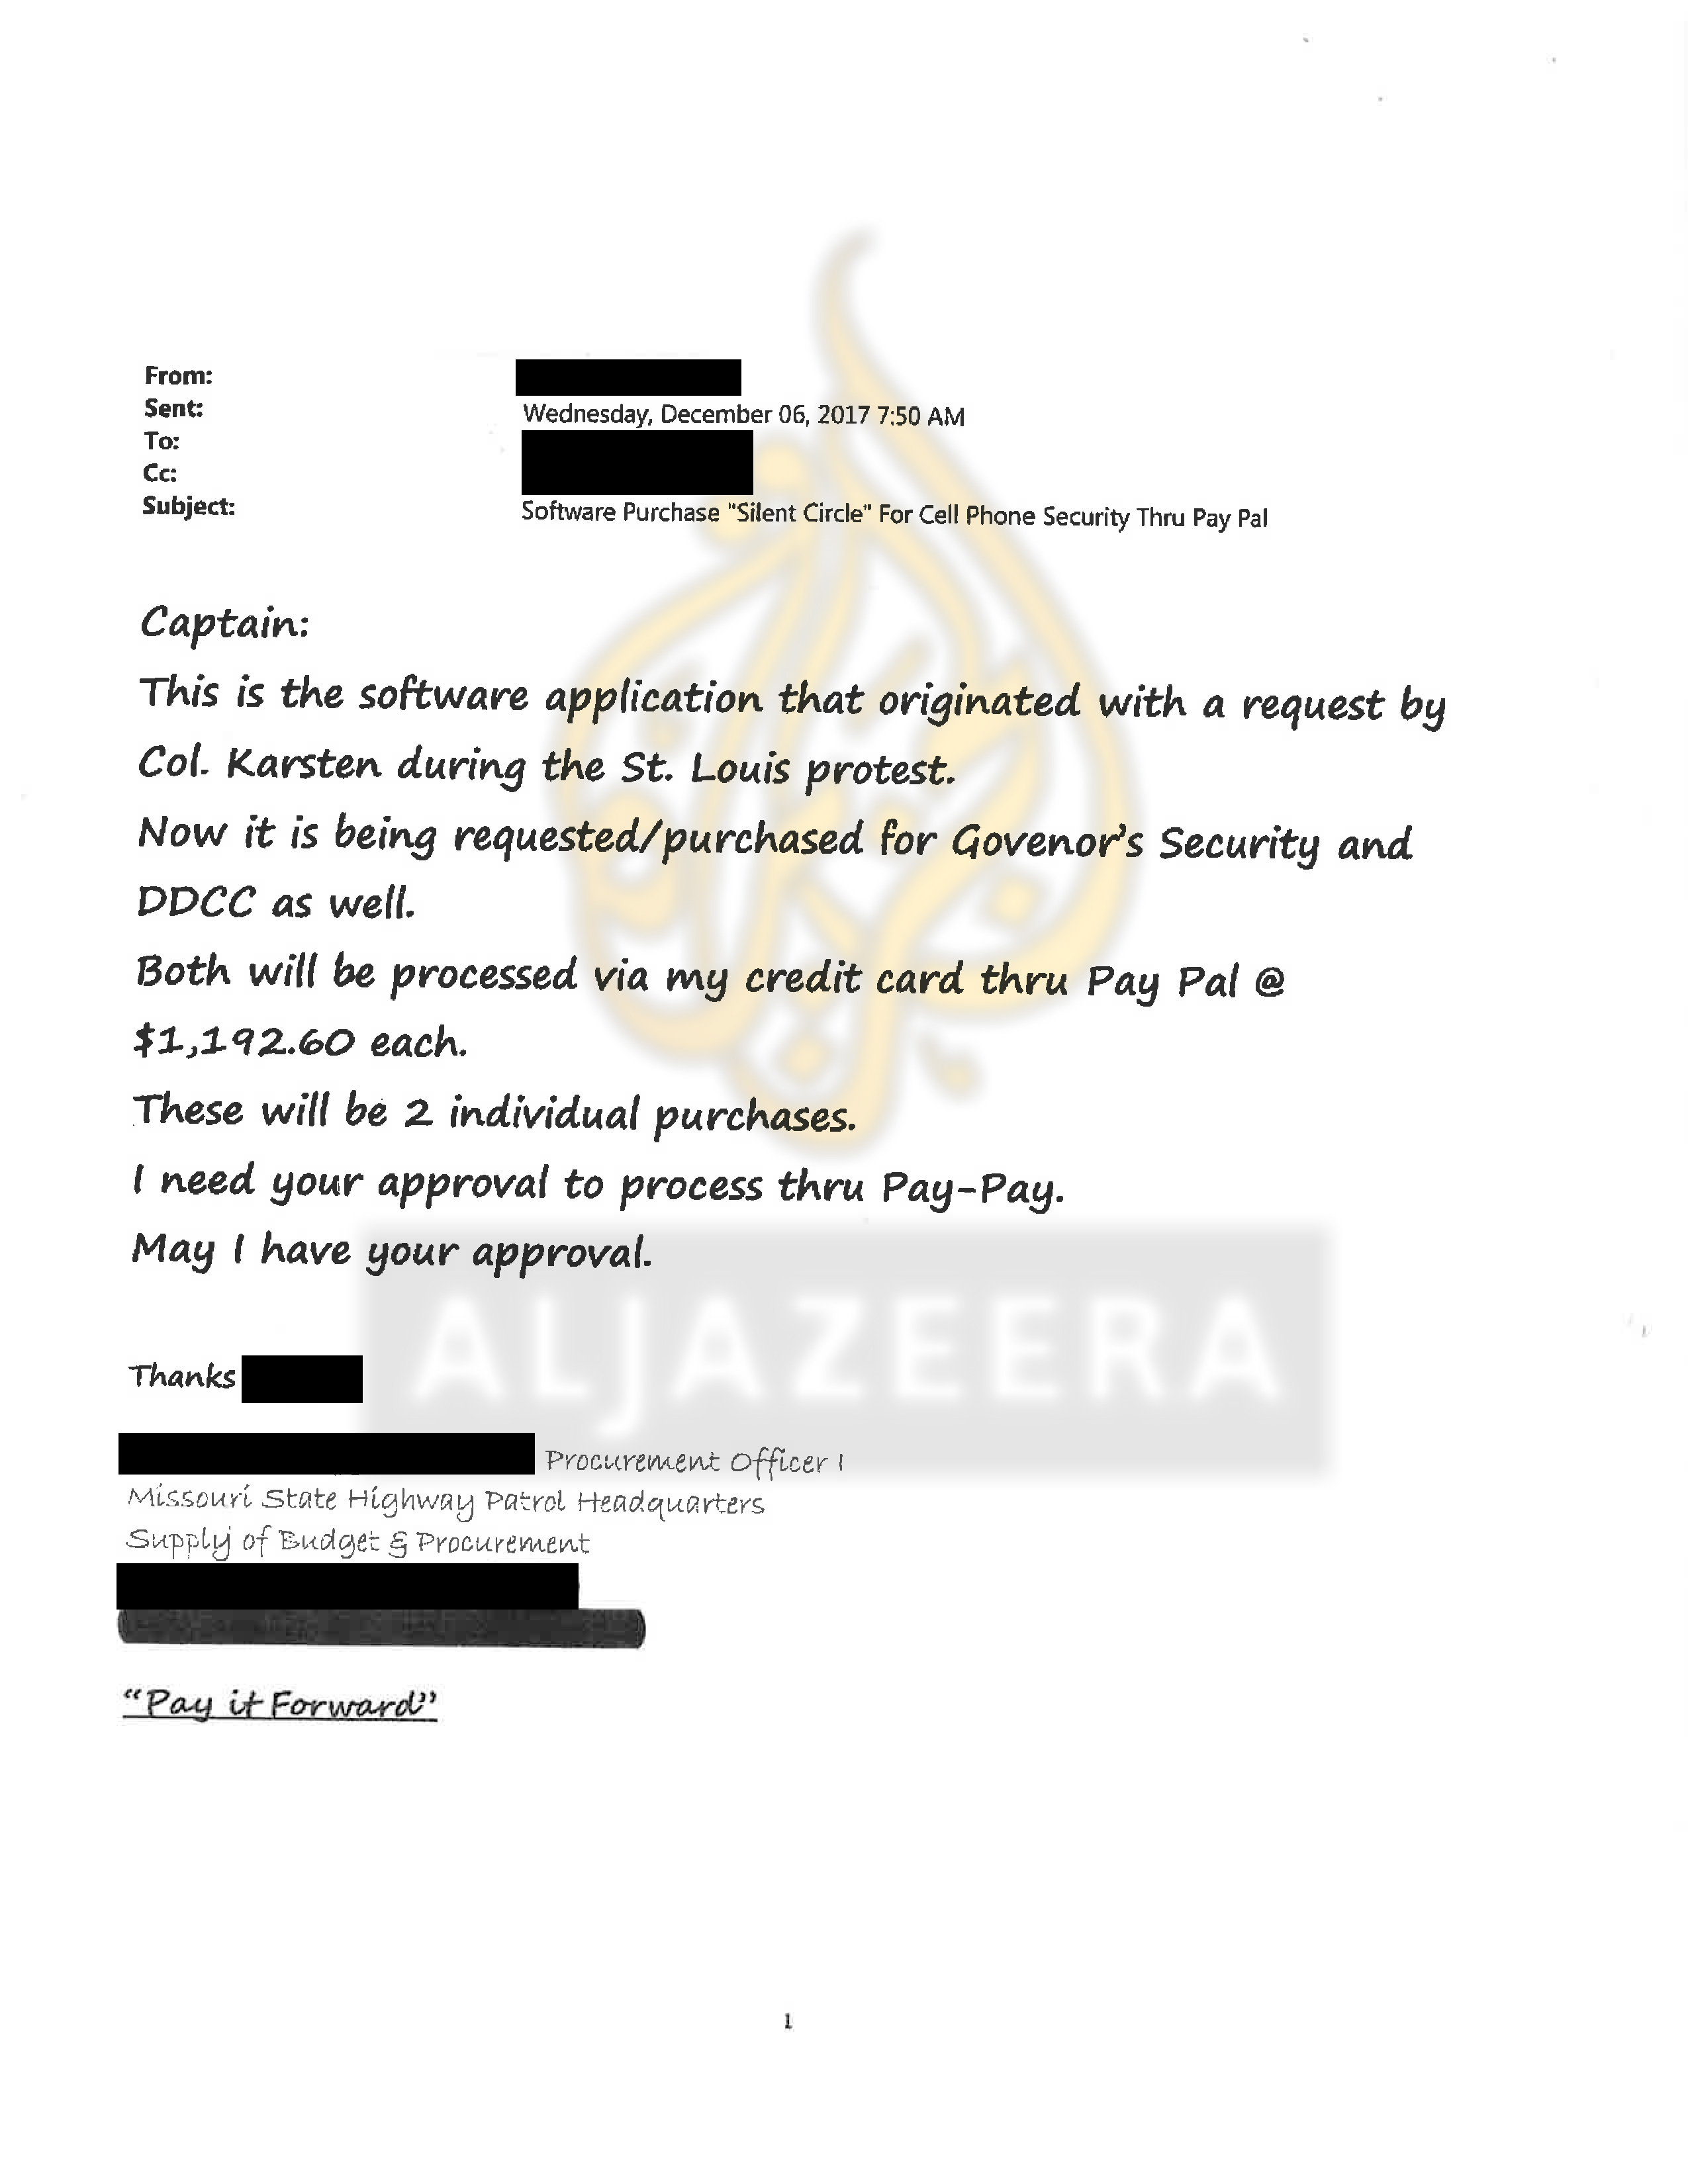 Email obtained by Al Jazeera shows the head of the Missouri Department of Public Safety was involved in the decision to use the app [Al Jazeera]